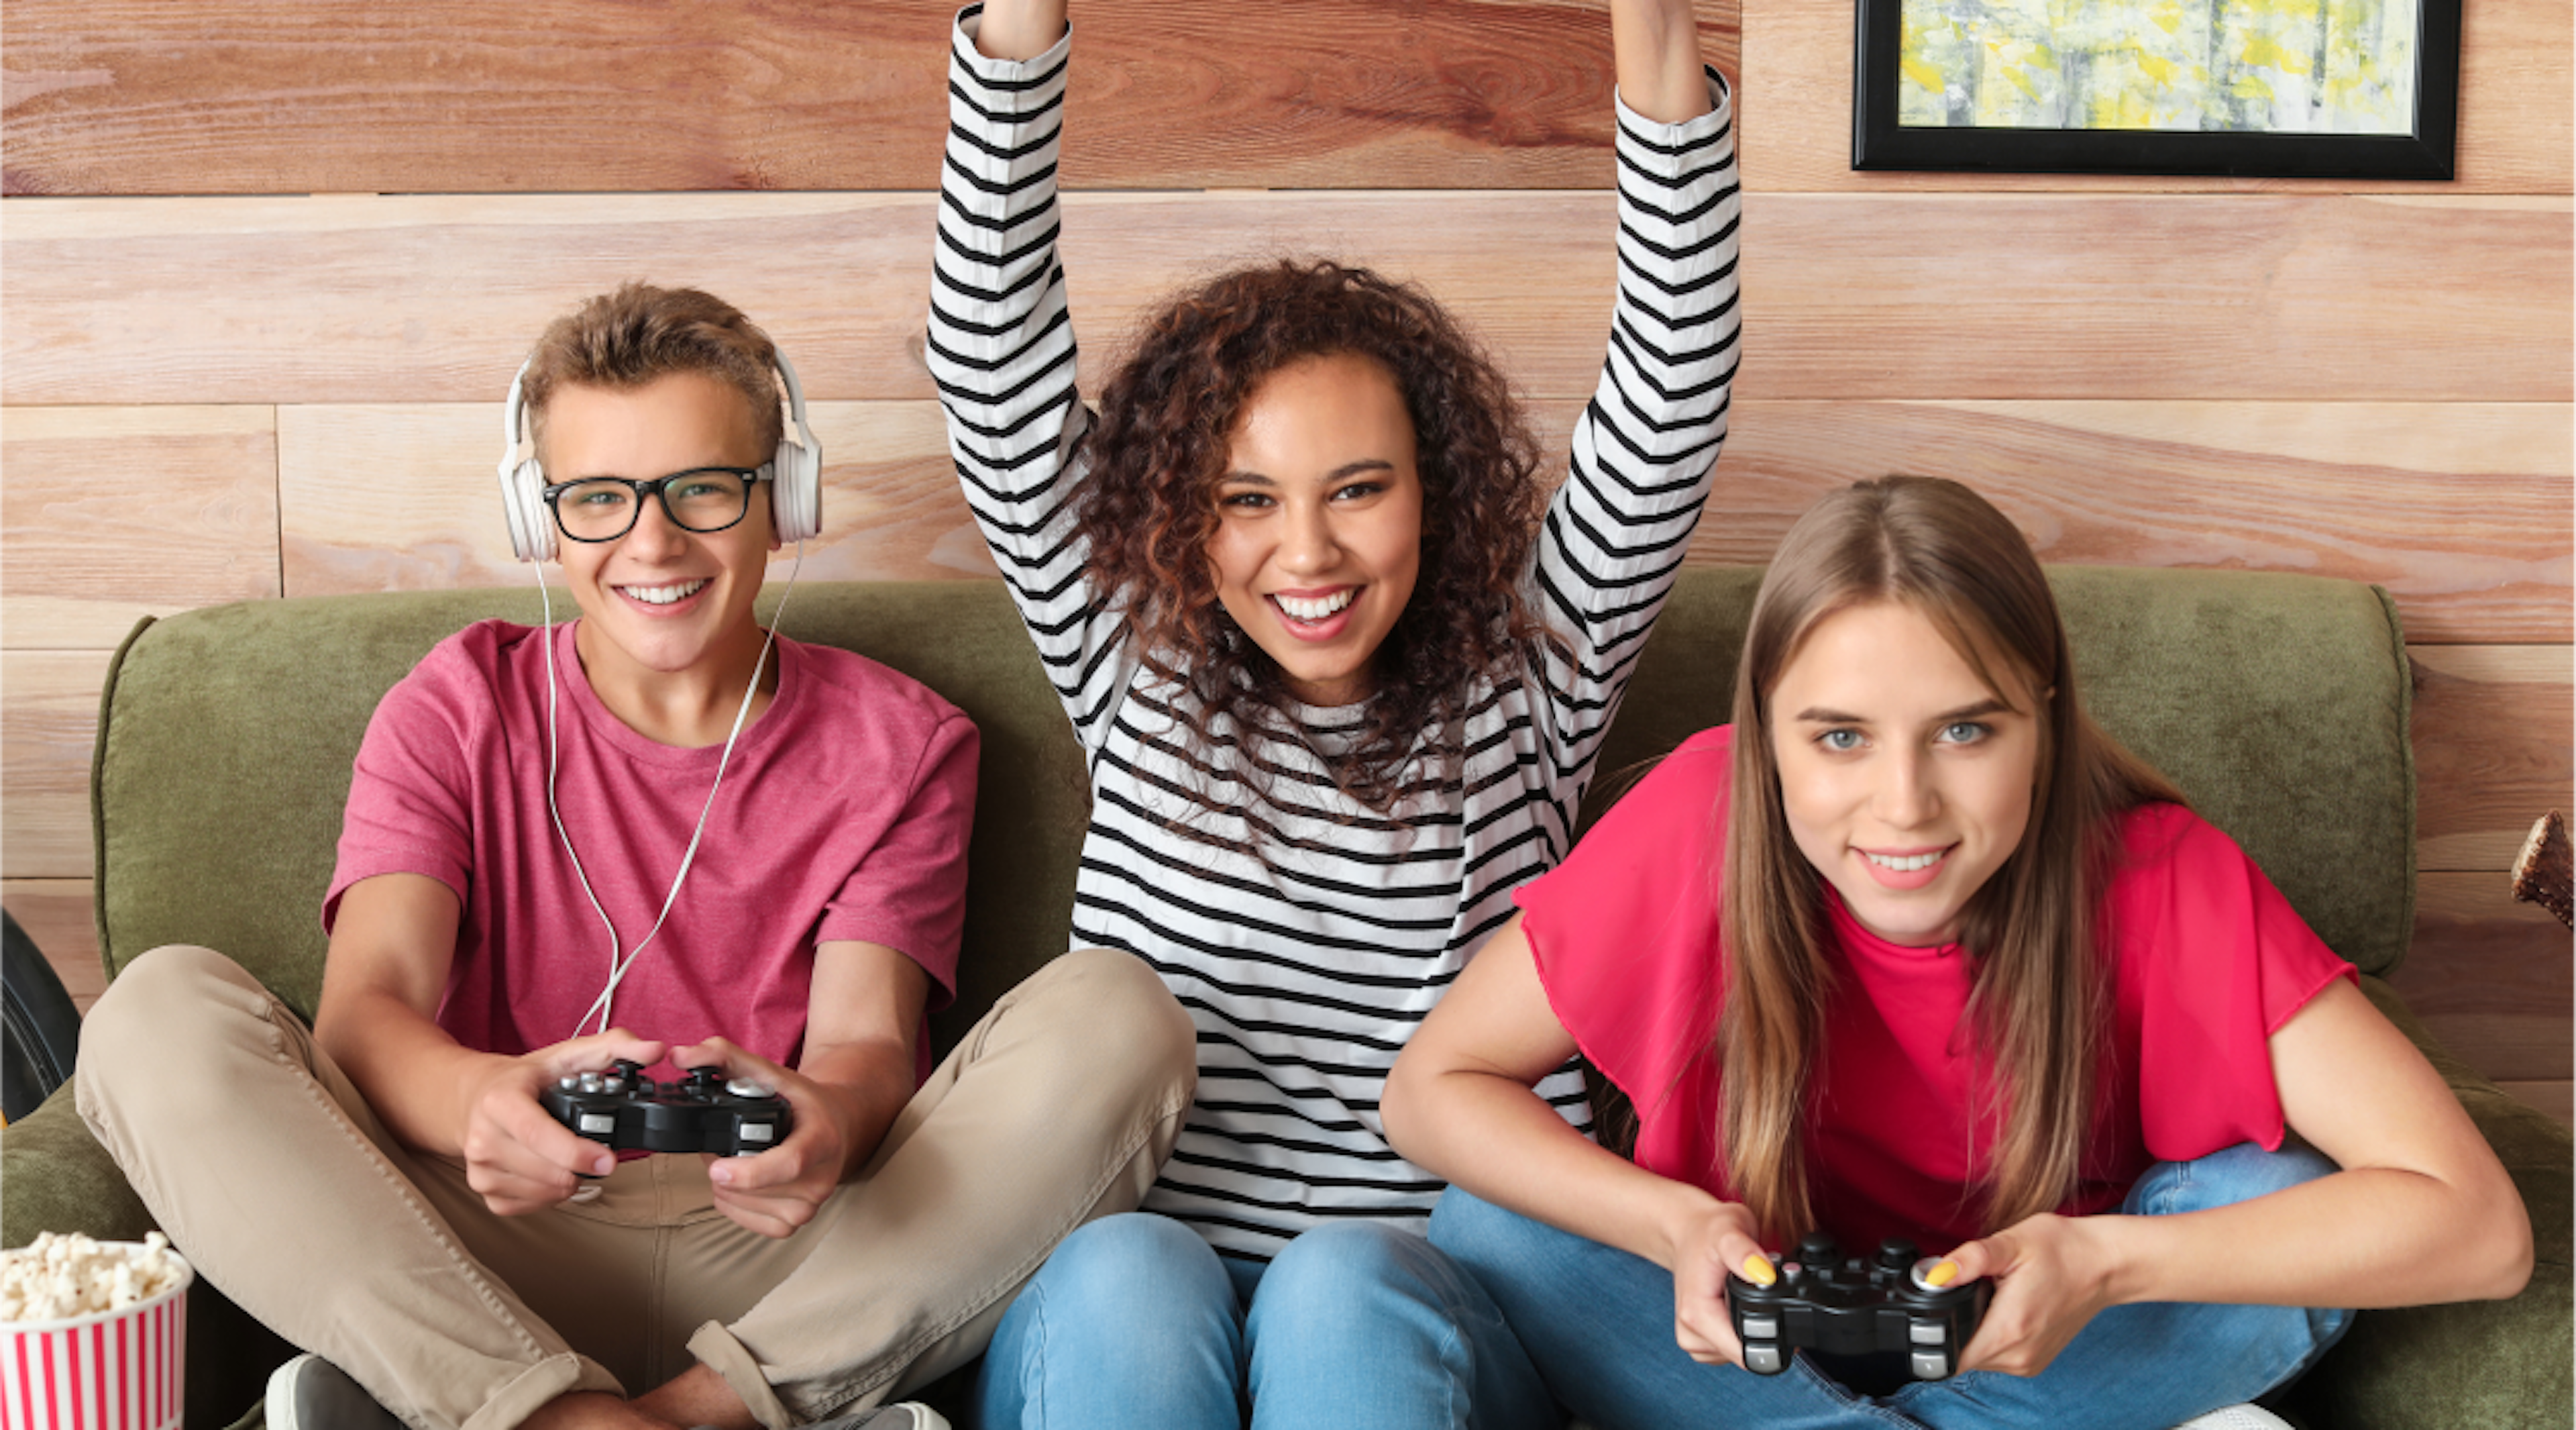 teens playing video game